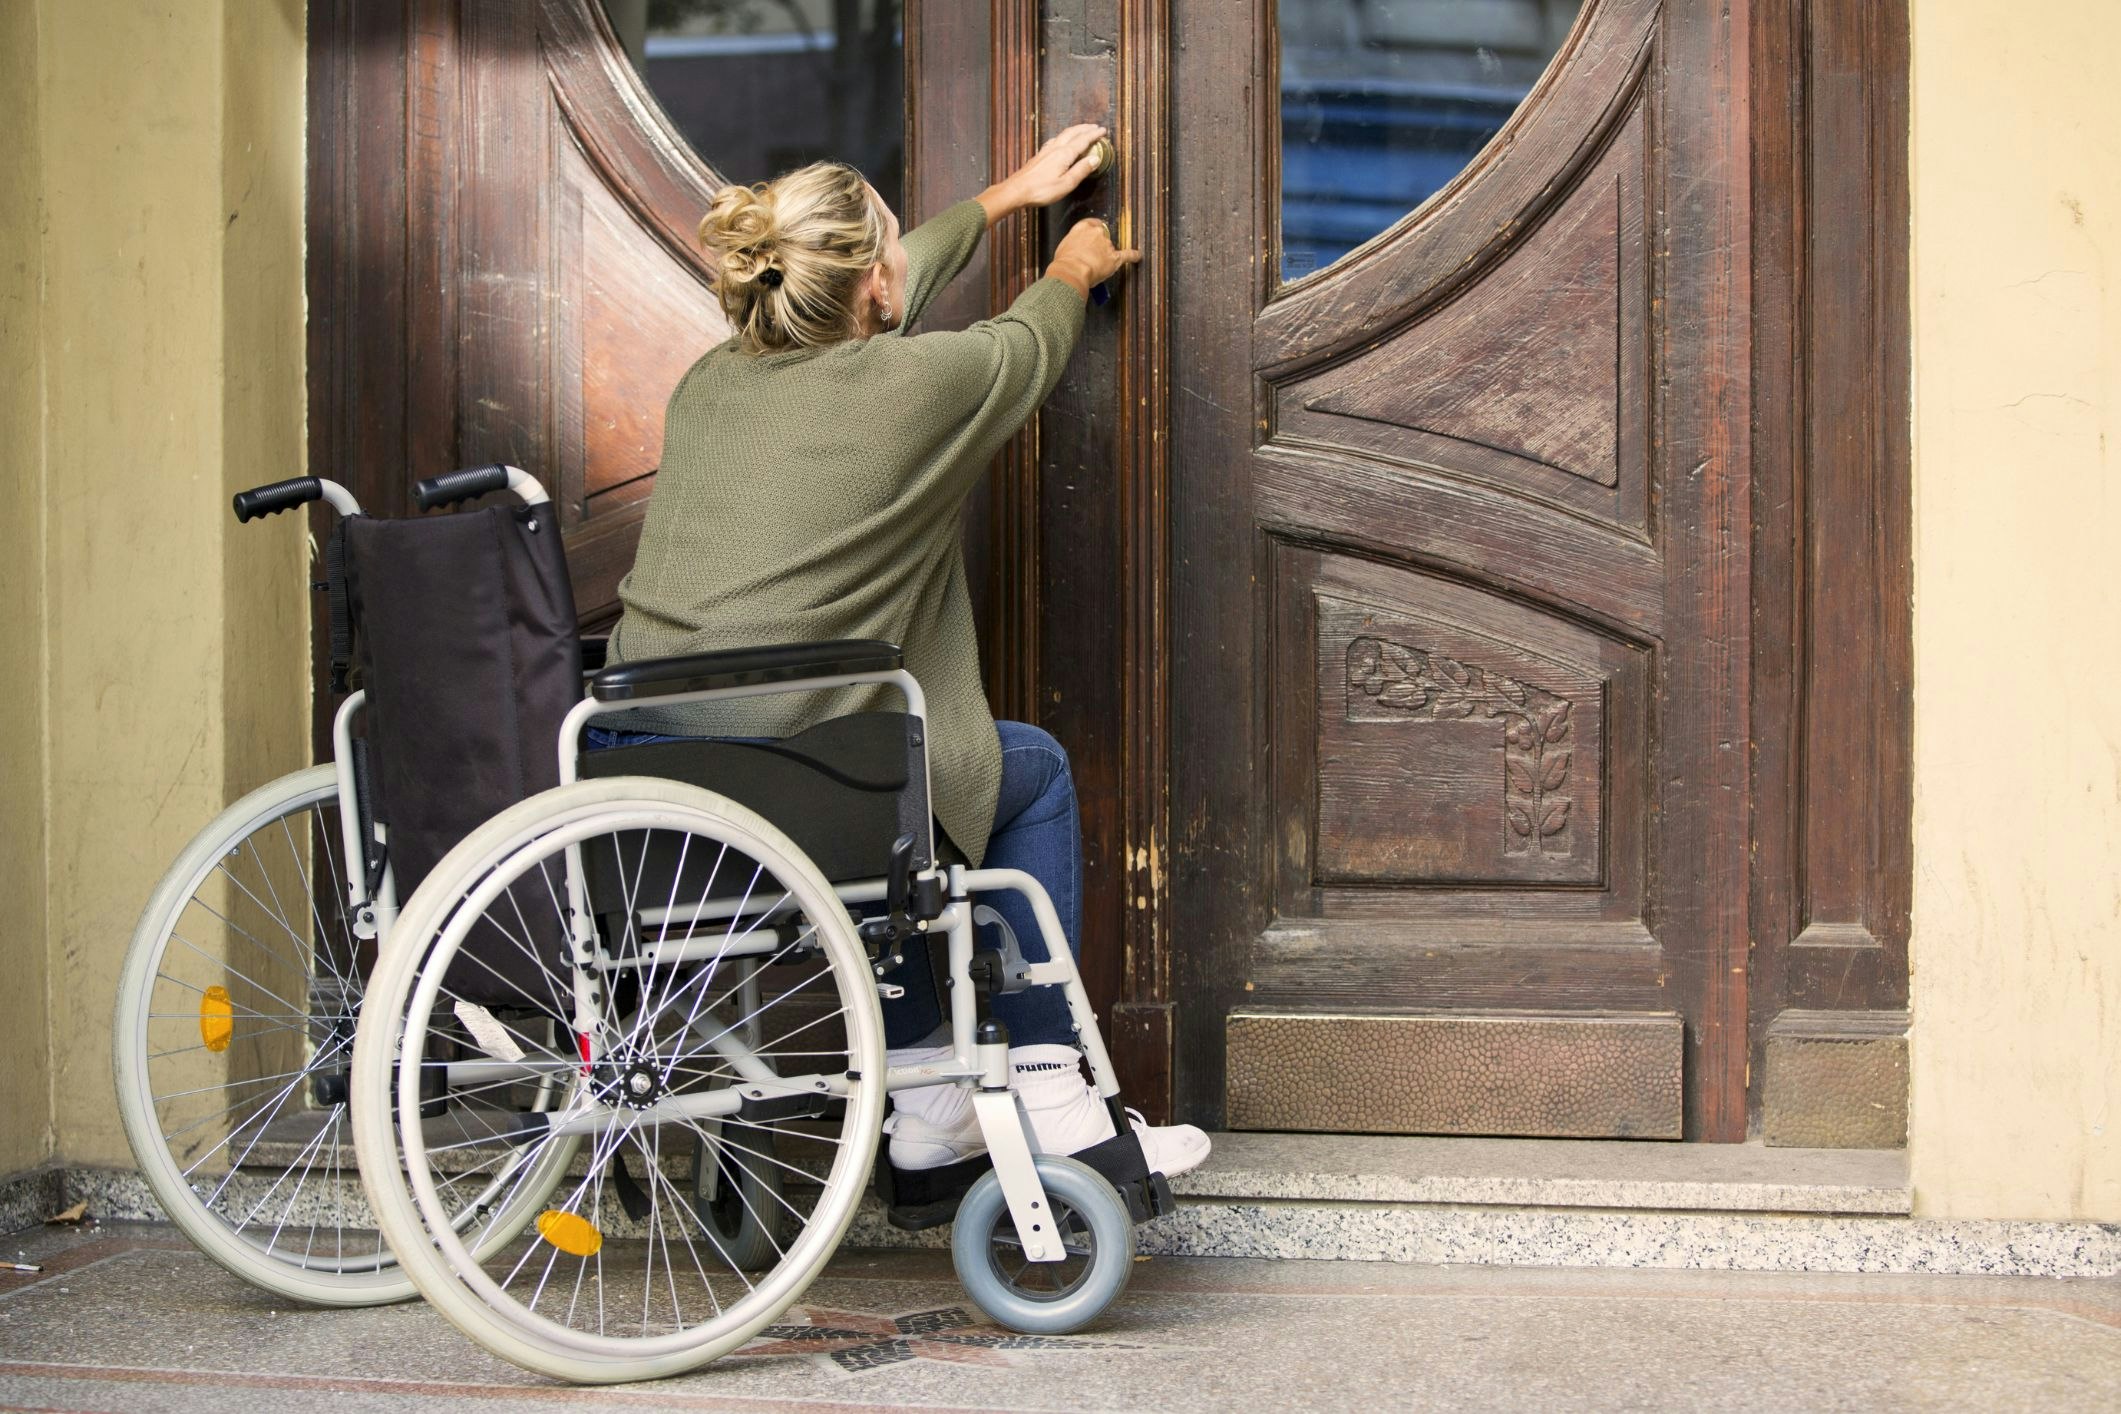 <p>While a couple of steps to the house or a smaller bathroom might not seem problematic, such housing layouts can pose great challenges for people with accessibility requirements. [Source: Shutterstock]</p>
